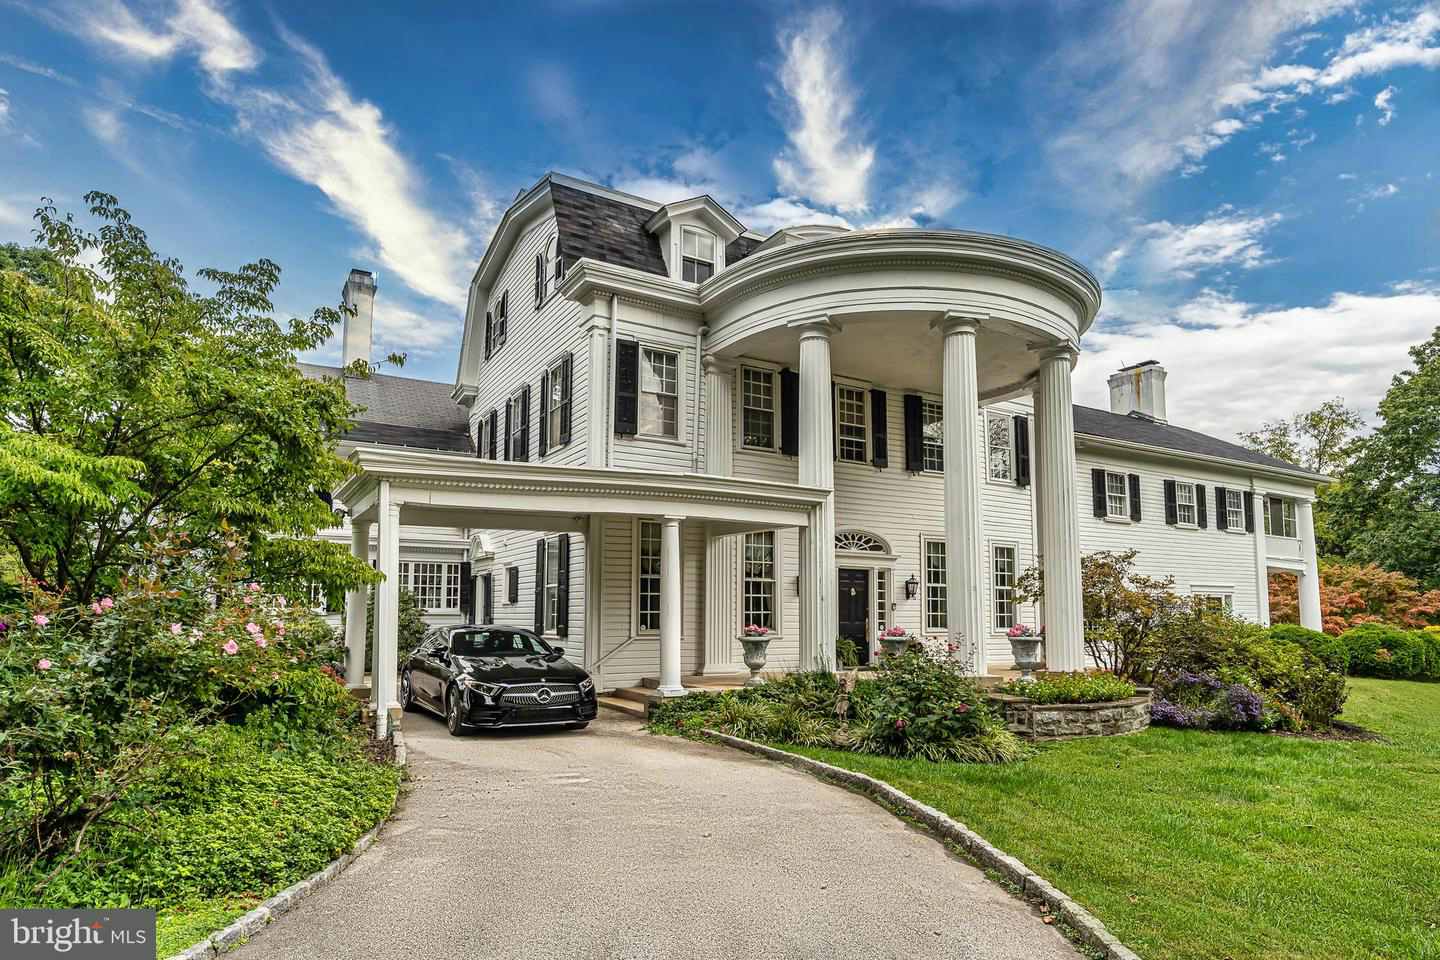 Malvern Bank House of the Week: ‘Great Gatsby’ 8-Bedroom Home in